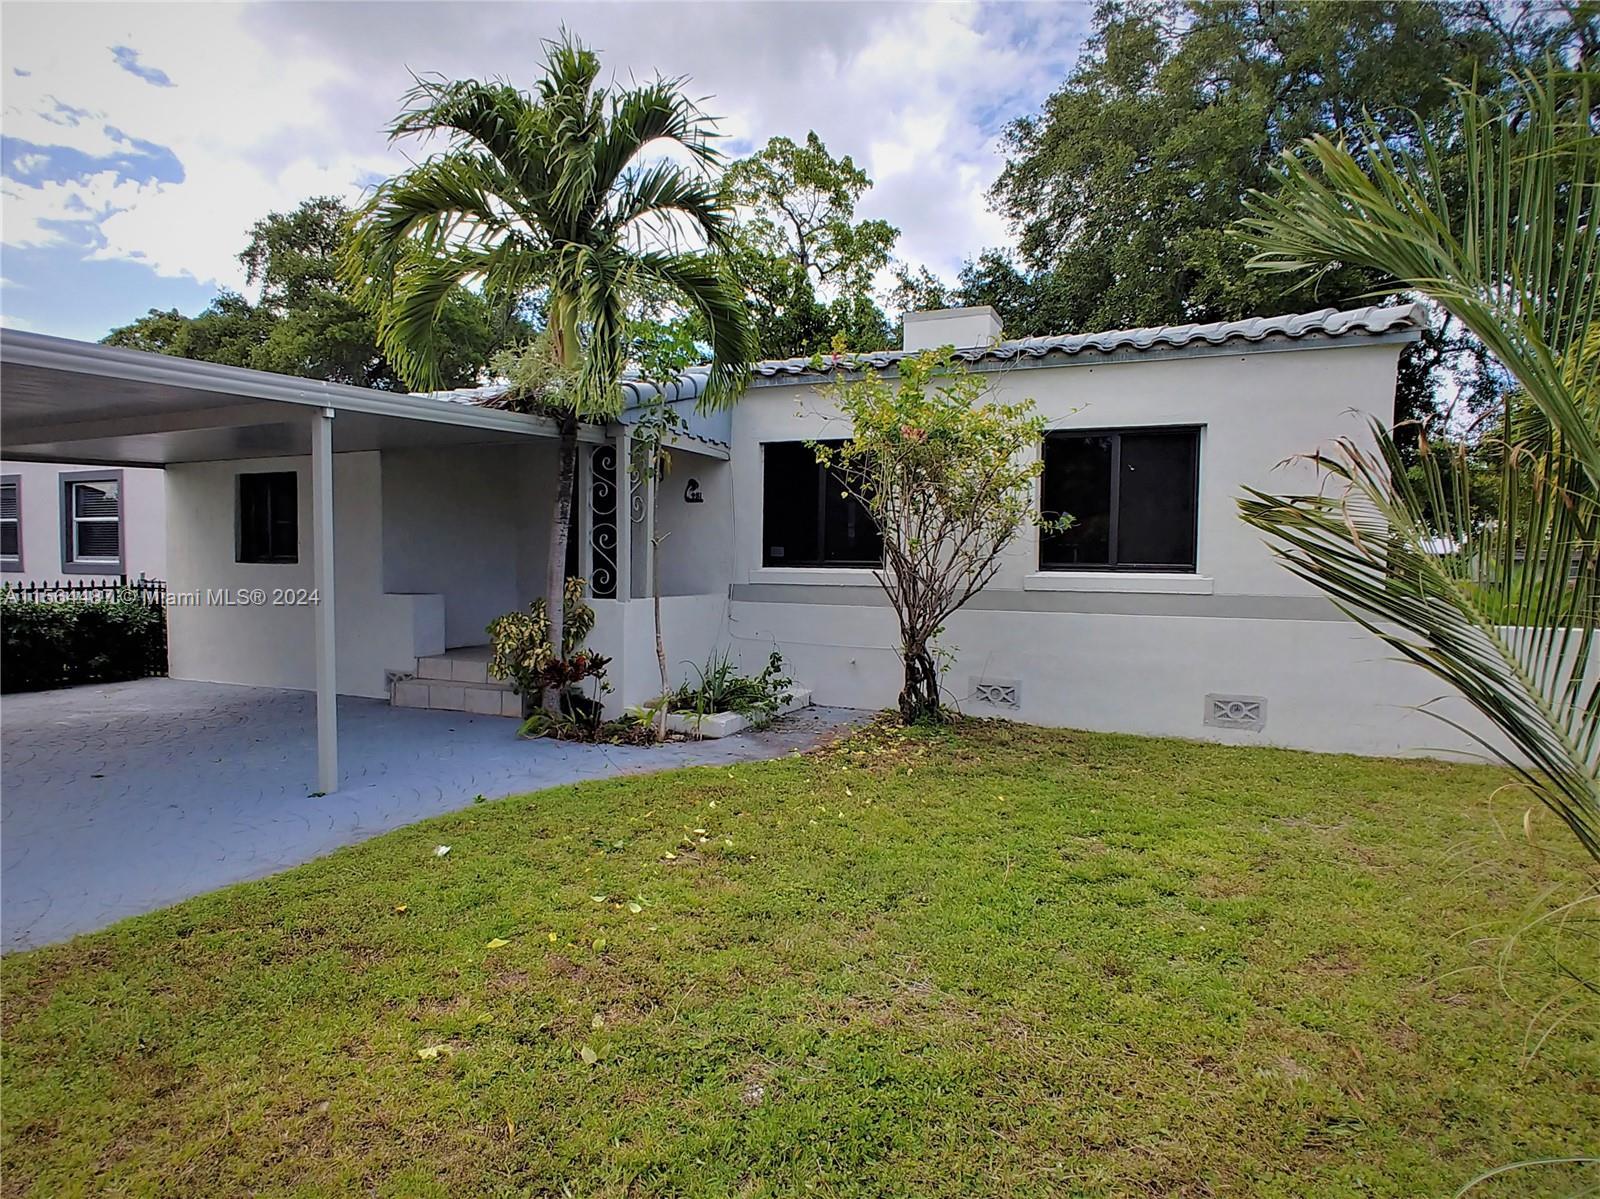 Photo of 251 NW 45 St in Miami, FL